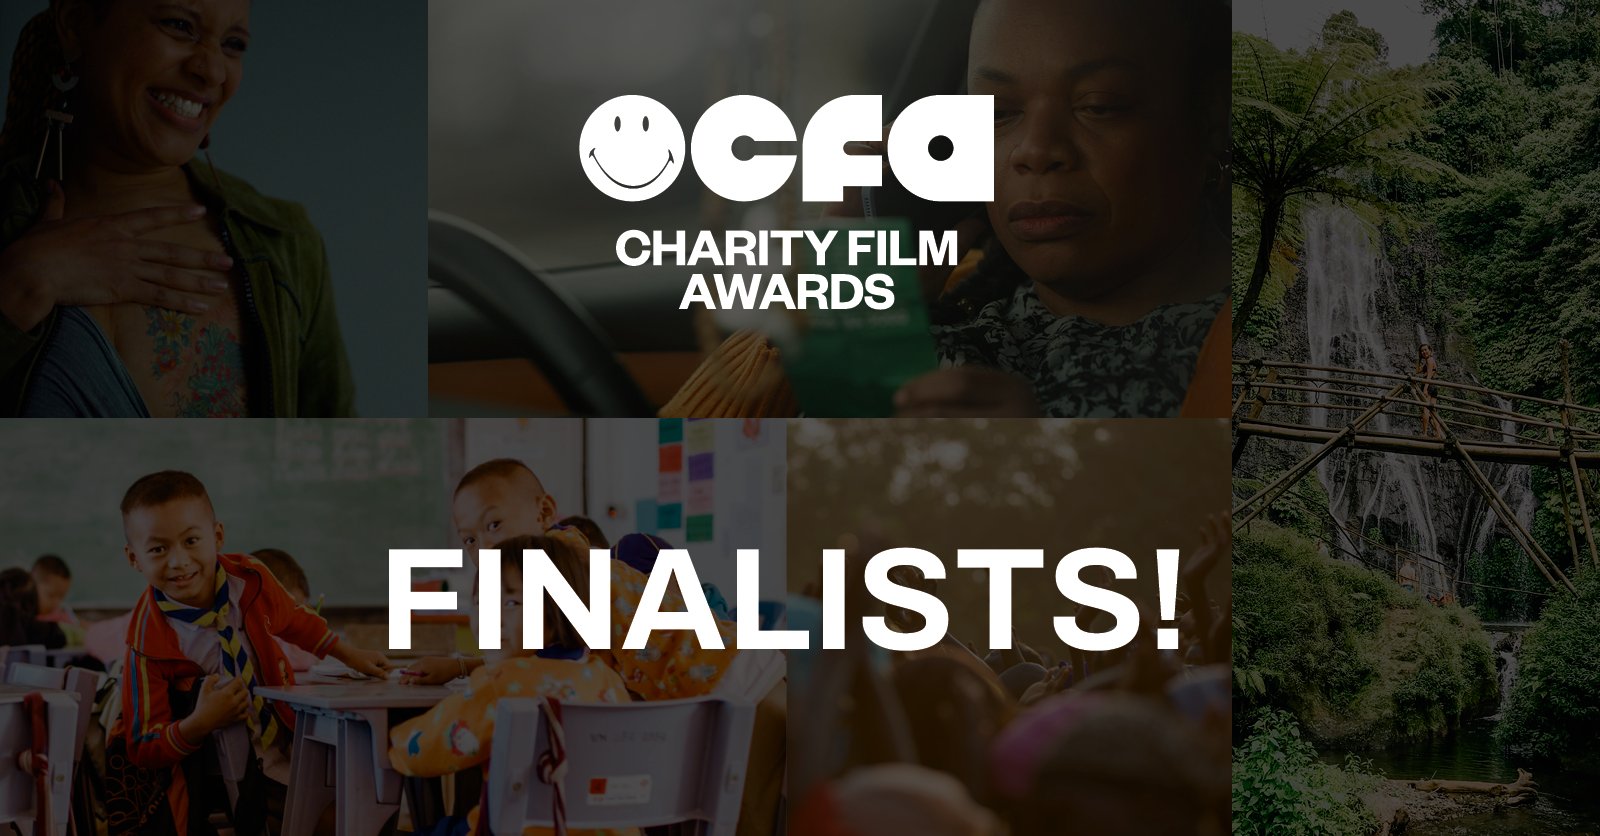 LOCAL HOSPICE FILM ANNOUNCED AS FINALIST FOR SMILEY CHARITY FILM AWARDS | Northamptonshire Chamber of Commerce